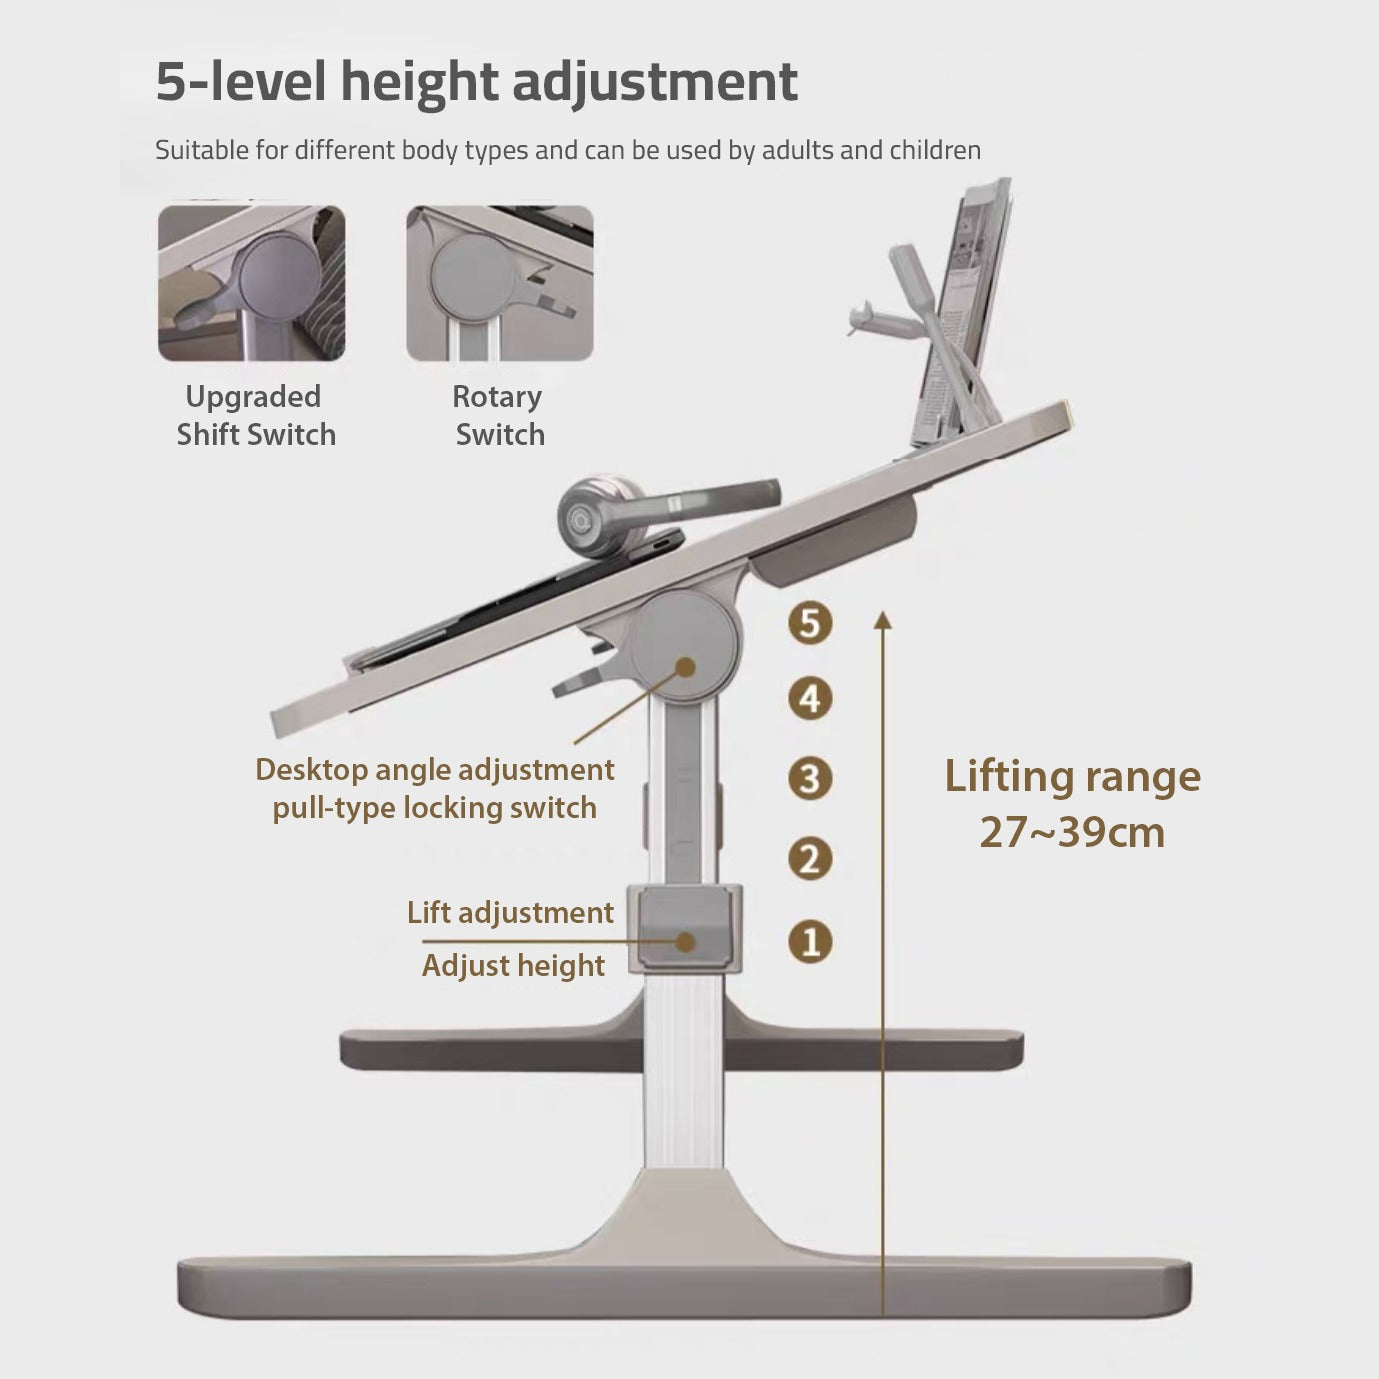 A drawing showing how to change the height of a flexible Adjustable Bed Laptop Table